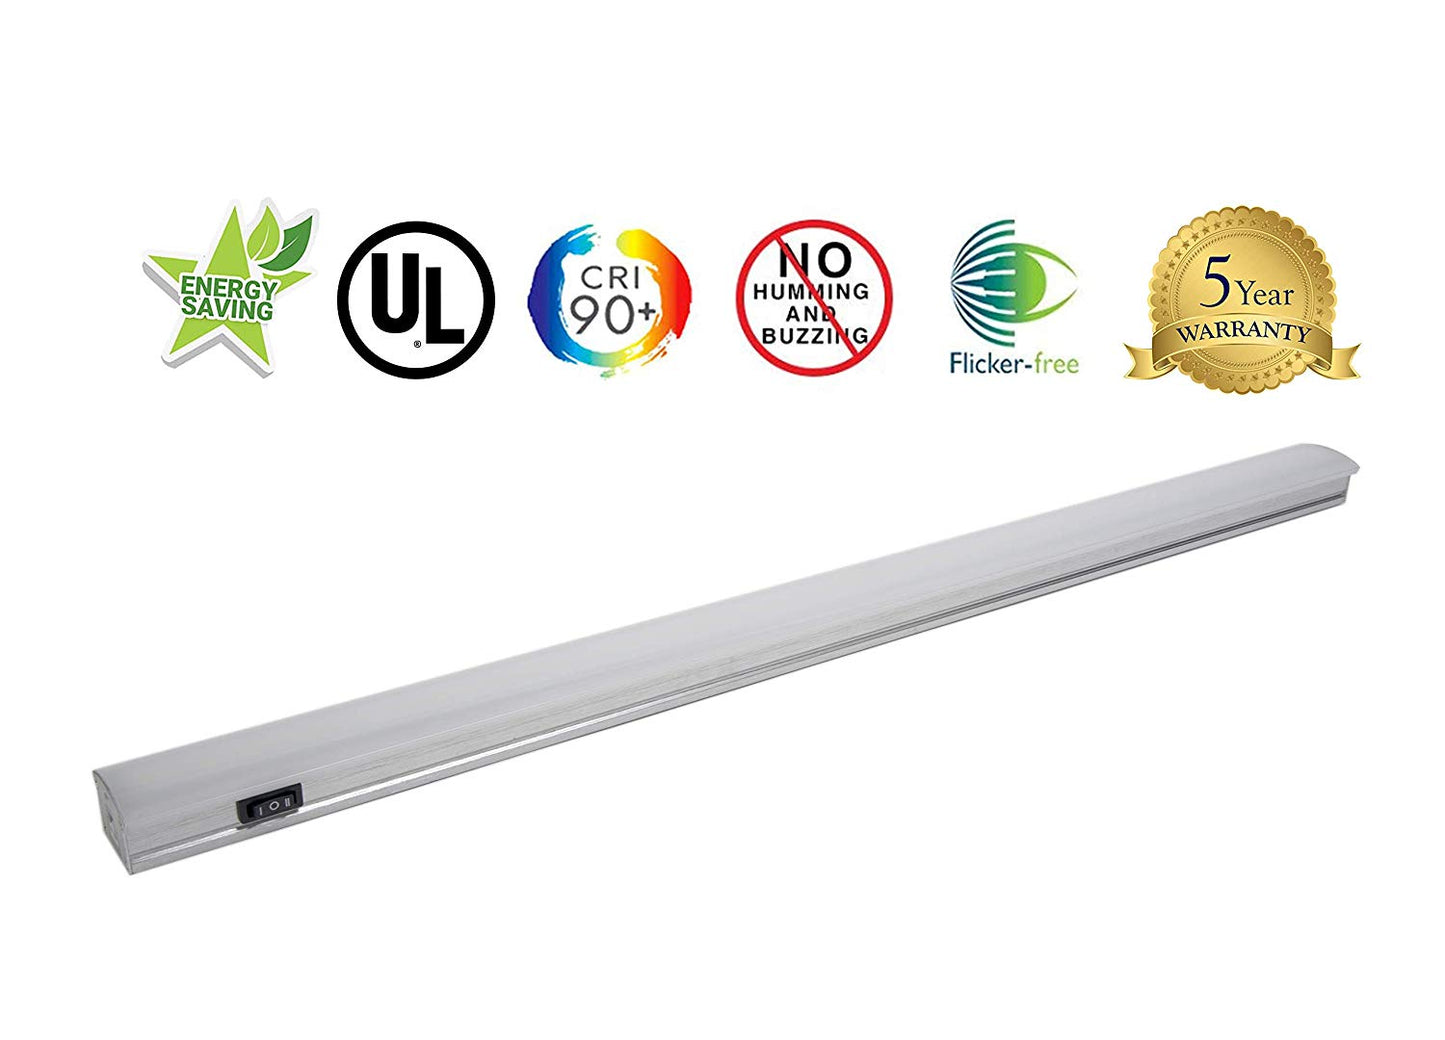 ZX524-HL-CW-9, LED, Task/Accent, Frosted Lens, Hi/Low Switch, 90 CRI, 4500K, 24"L, 9W